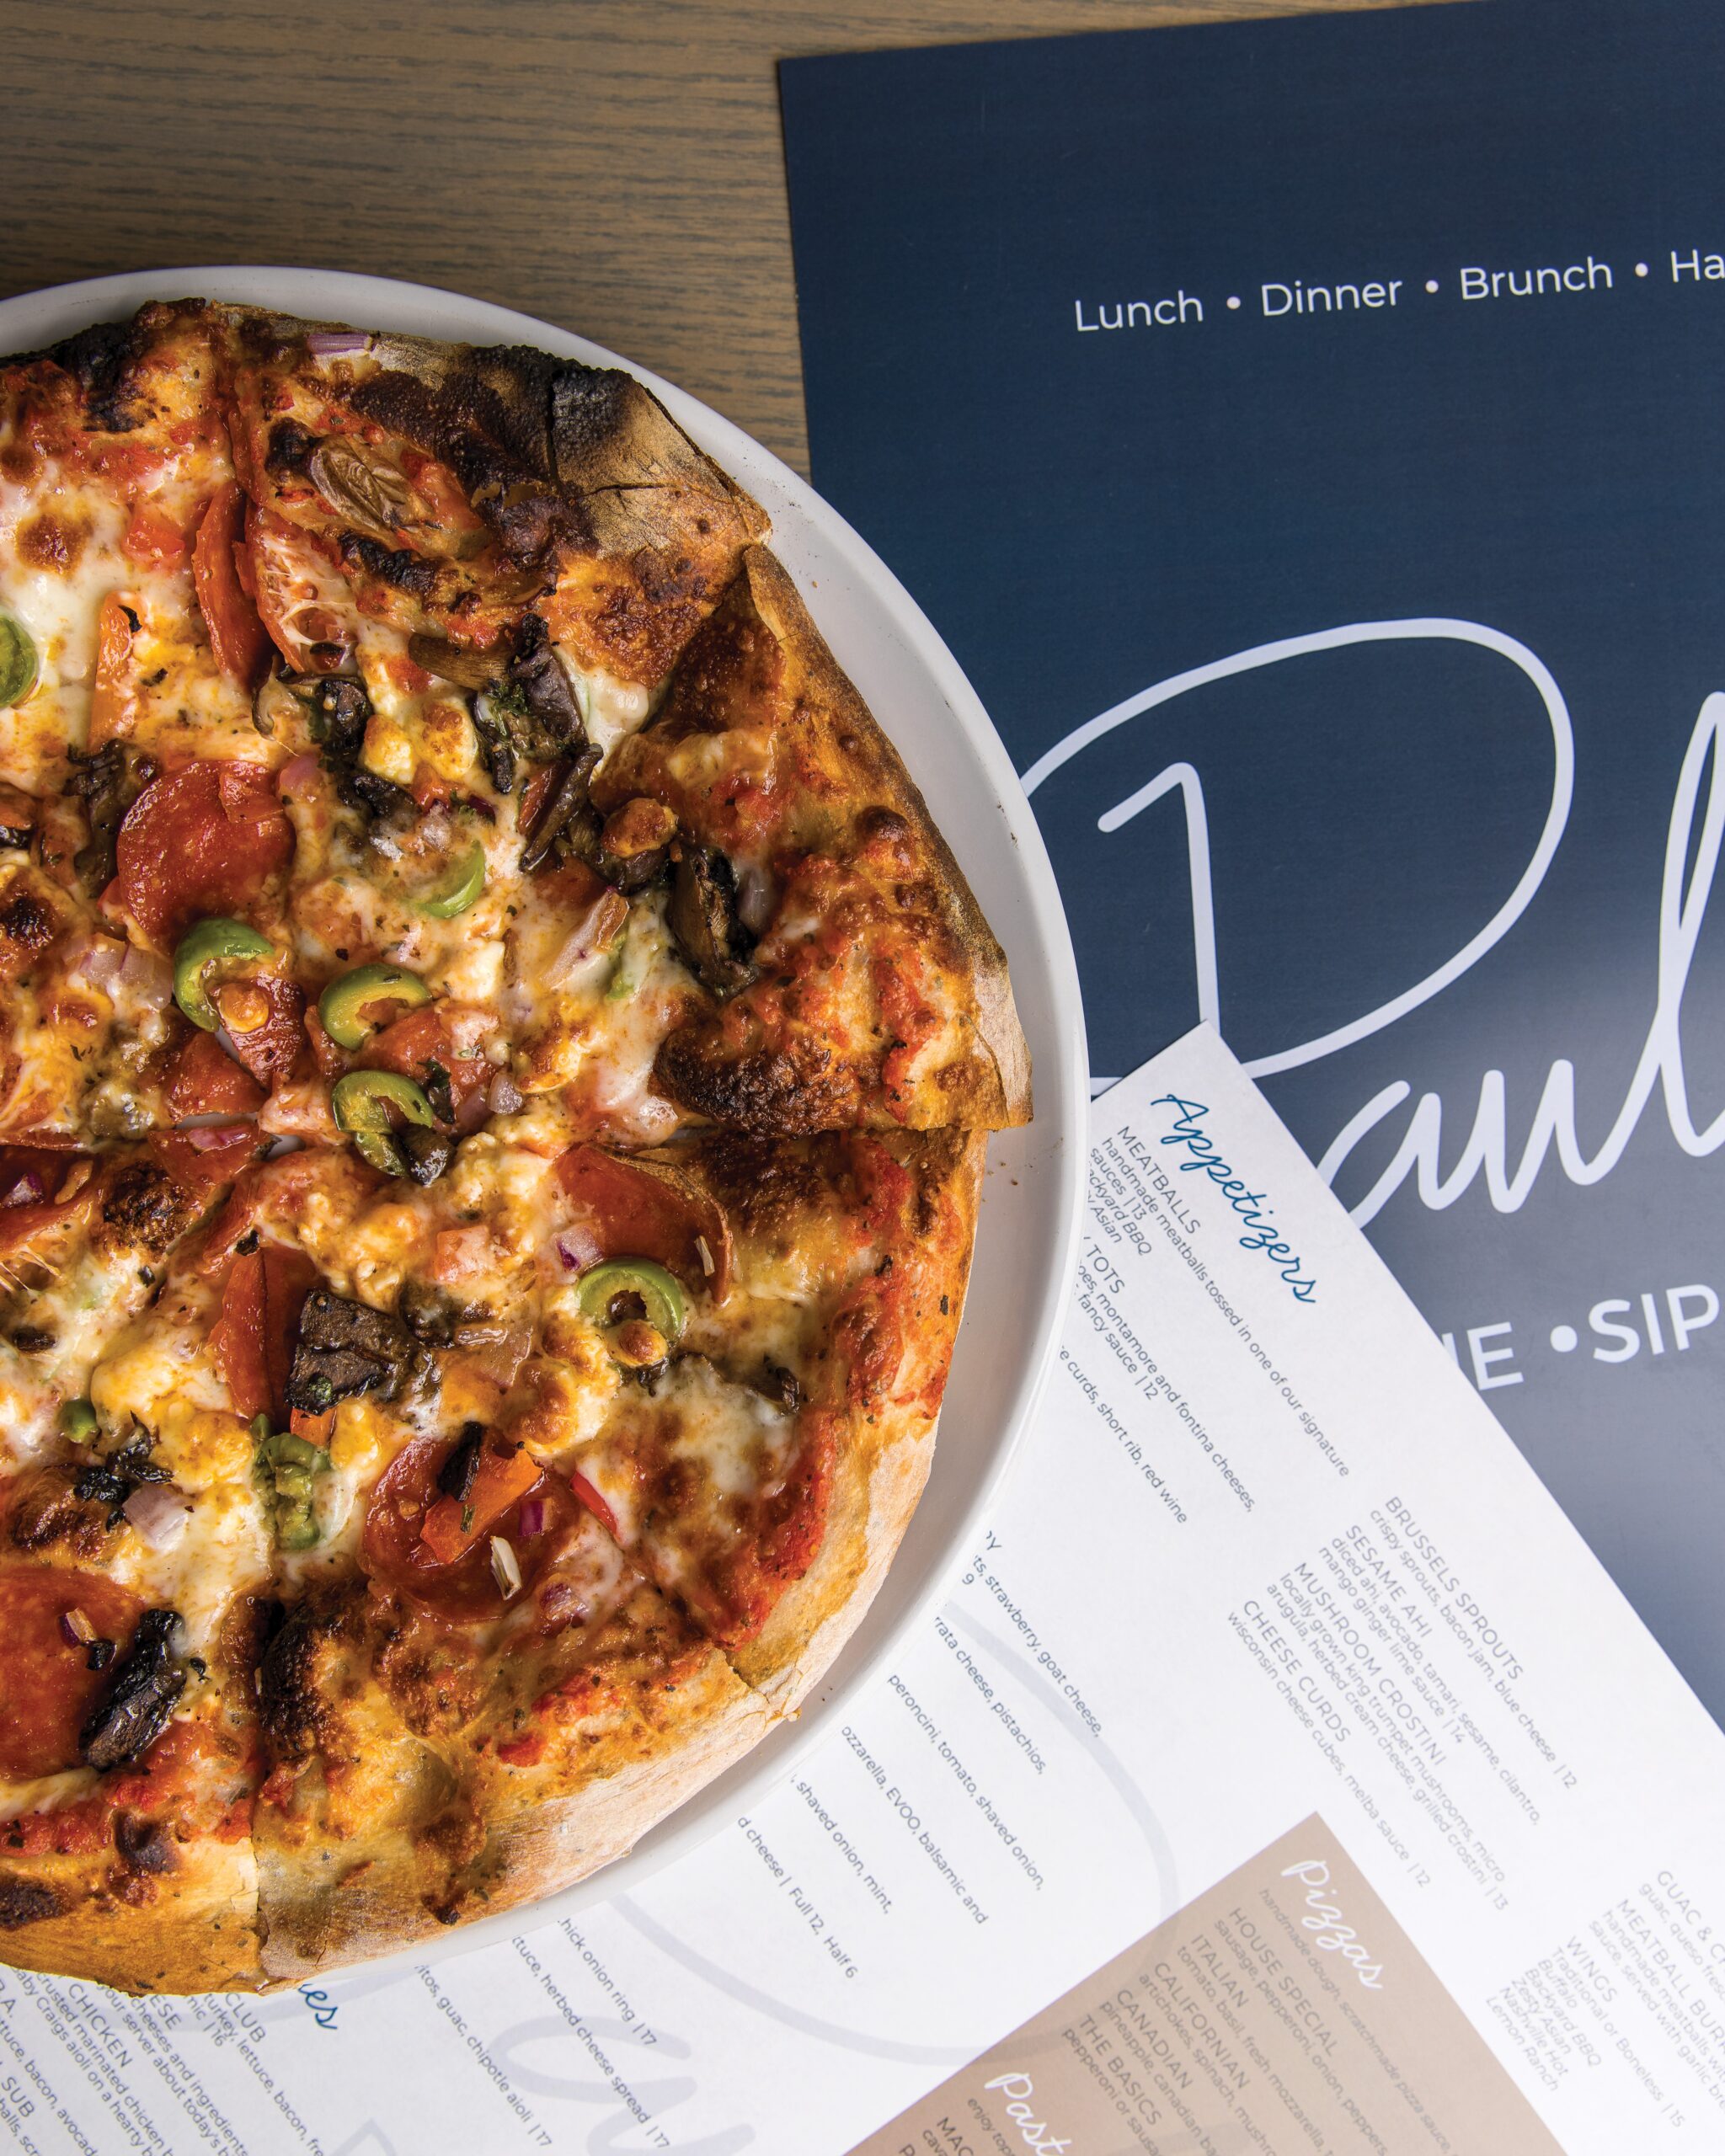 Pizza and menus from Paulie's.